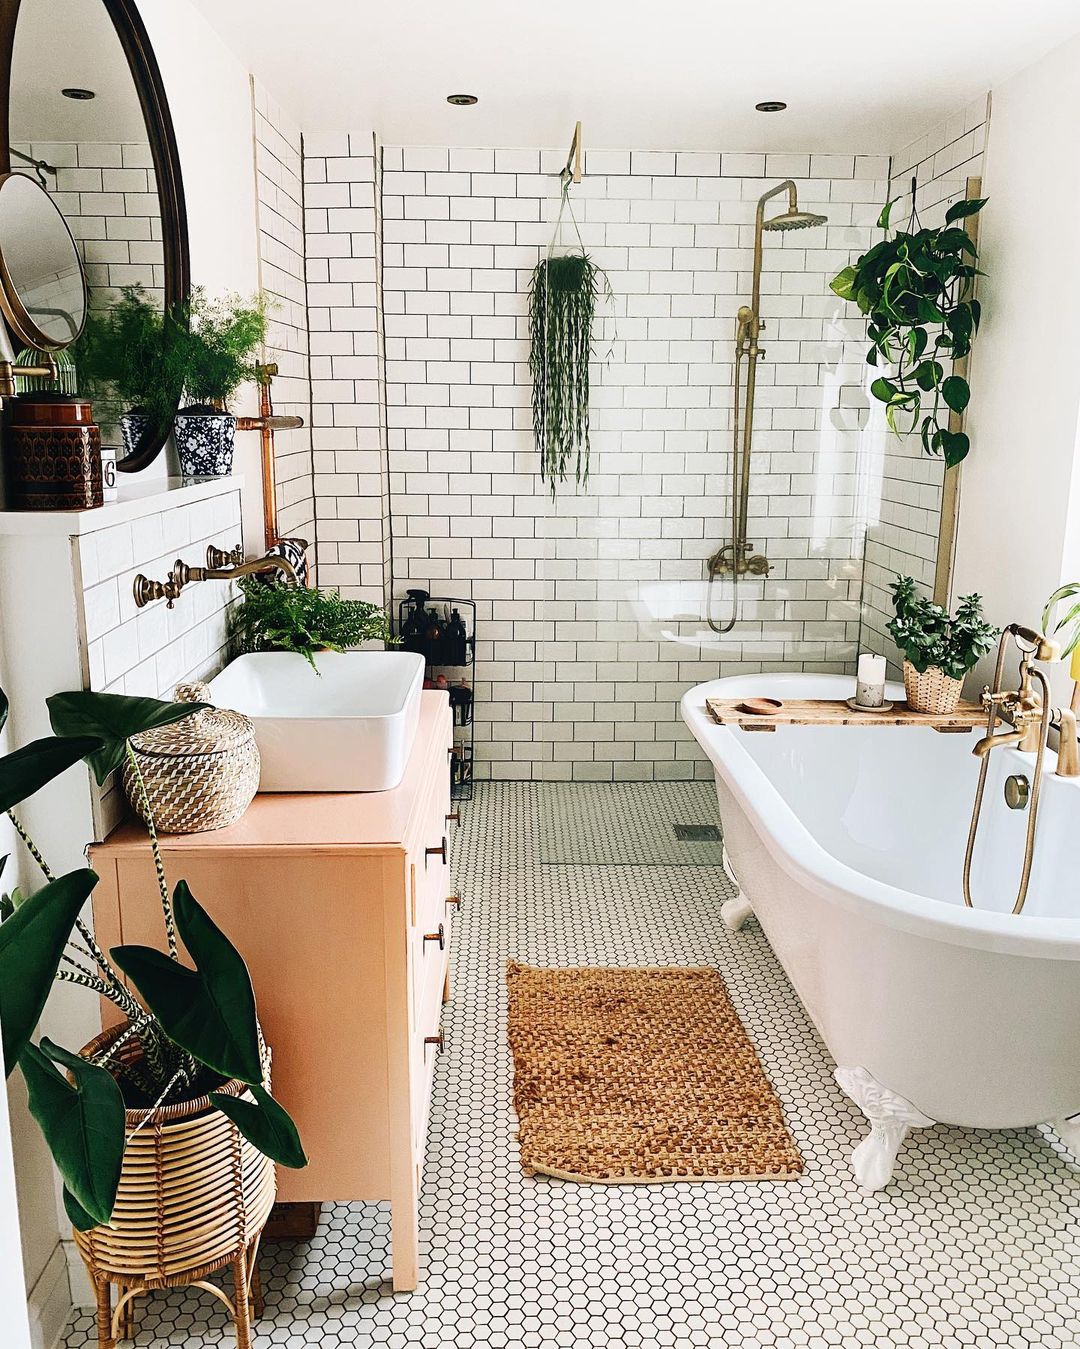 Spotless bathroom with plants, tub, repurposed kitchen sink. Photo by Instagram user @homebythestation.